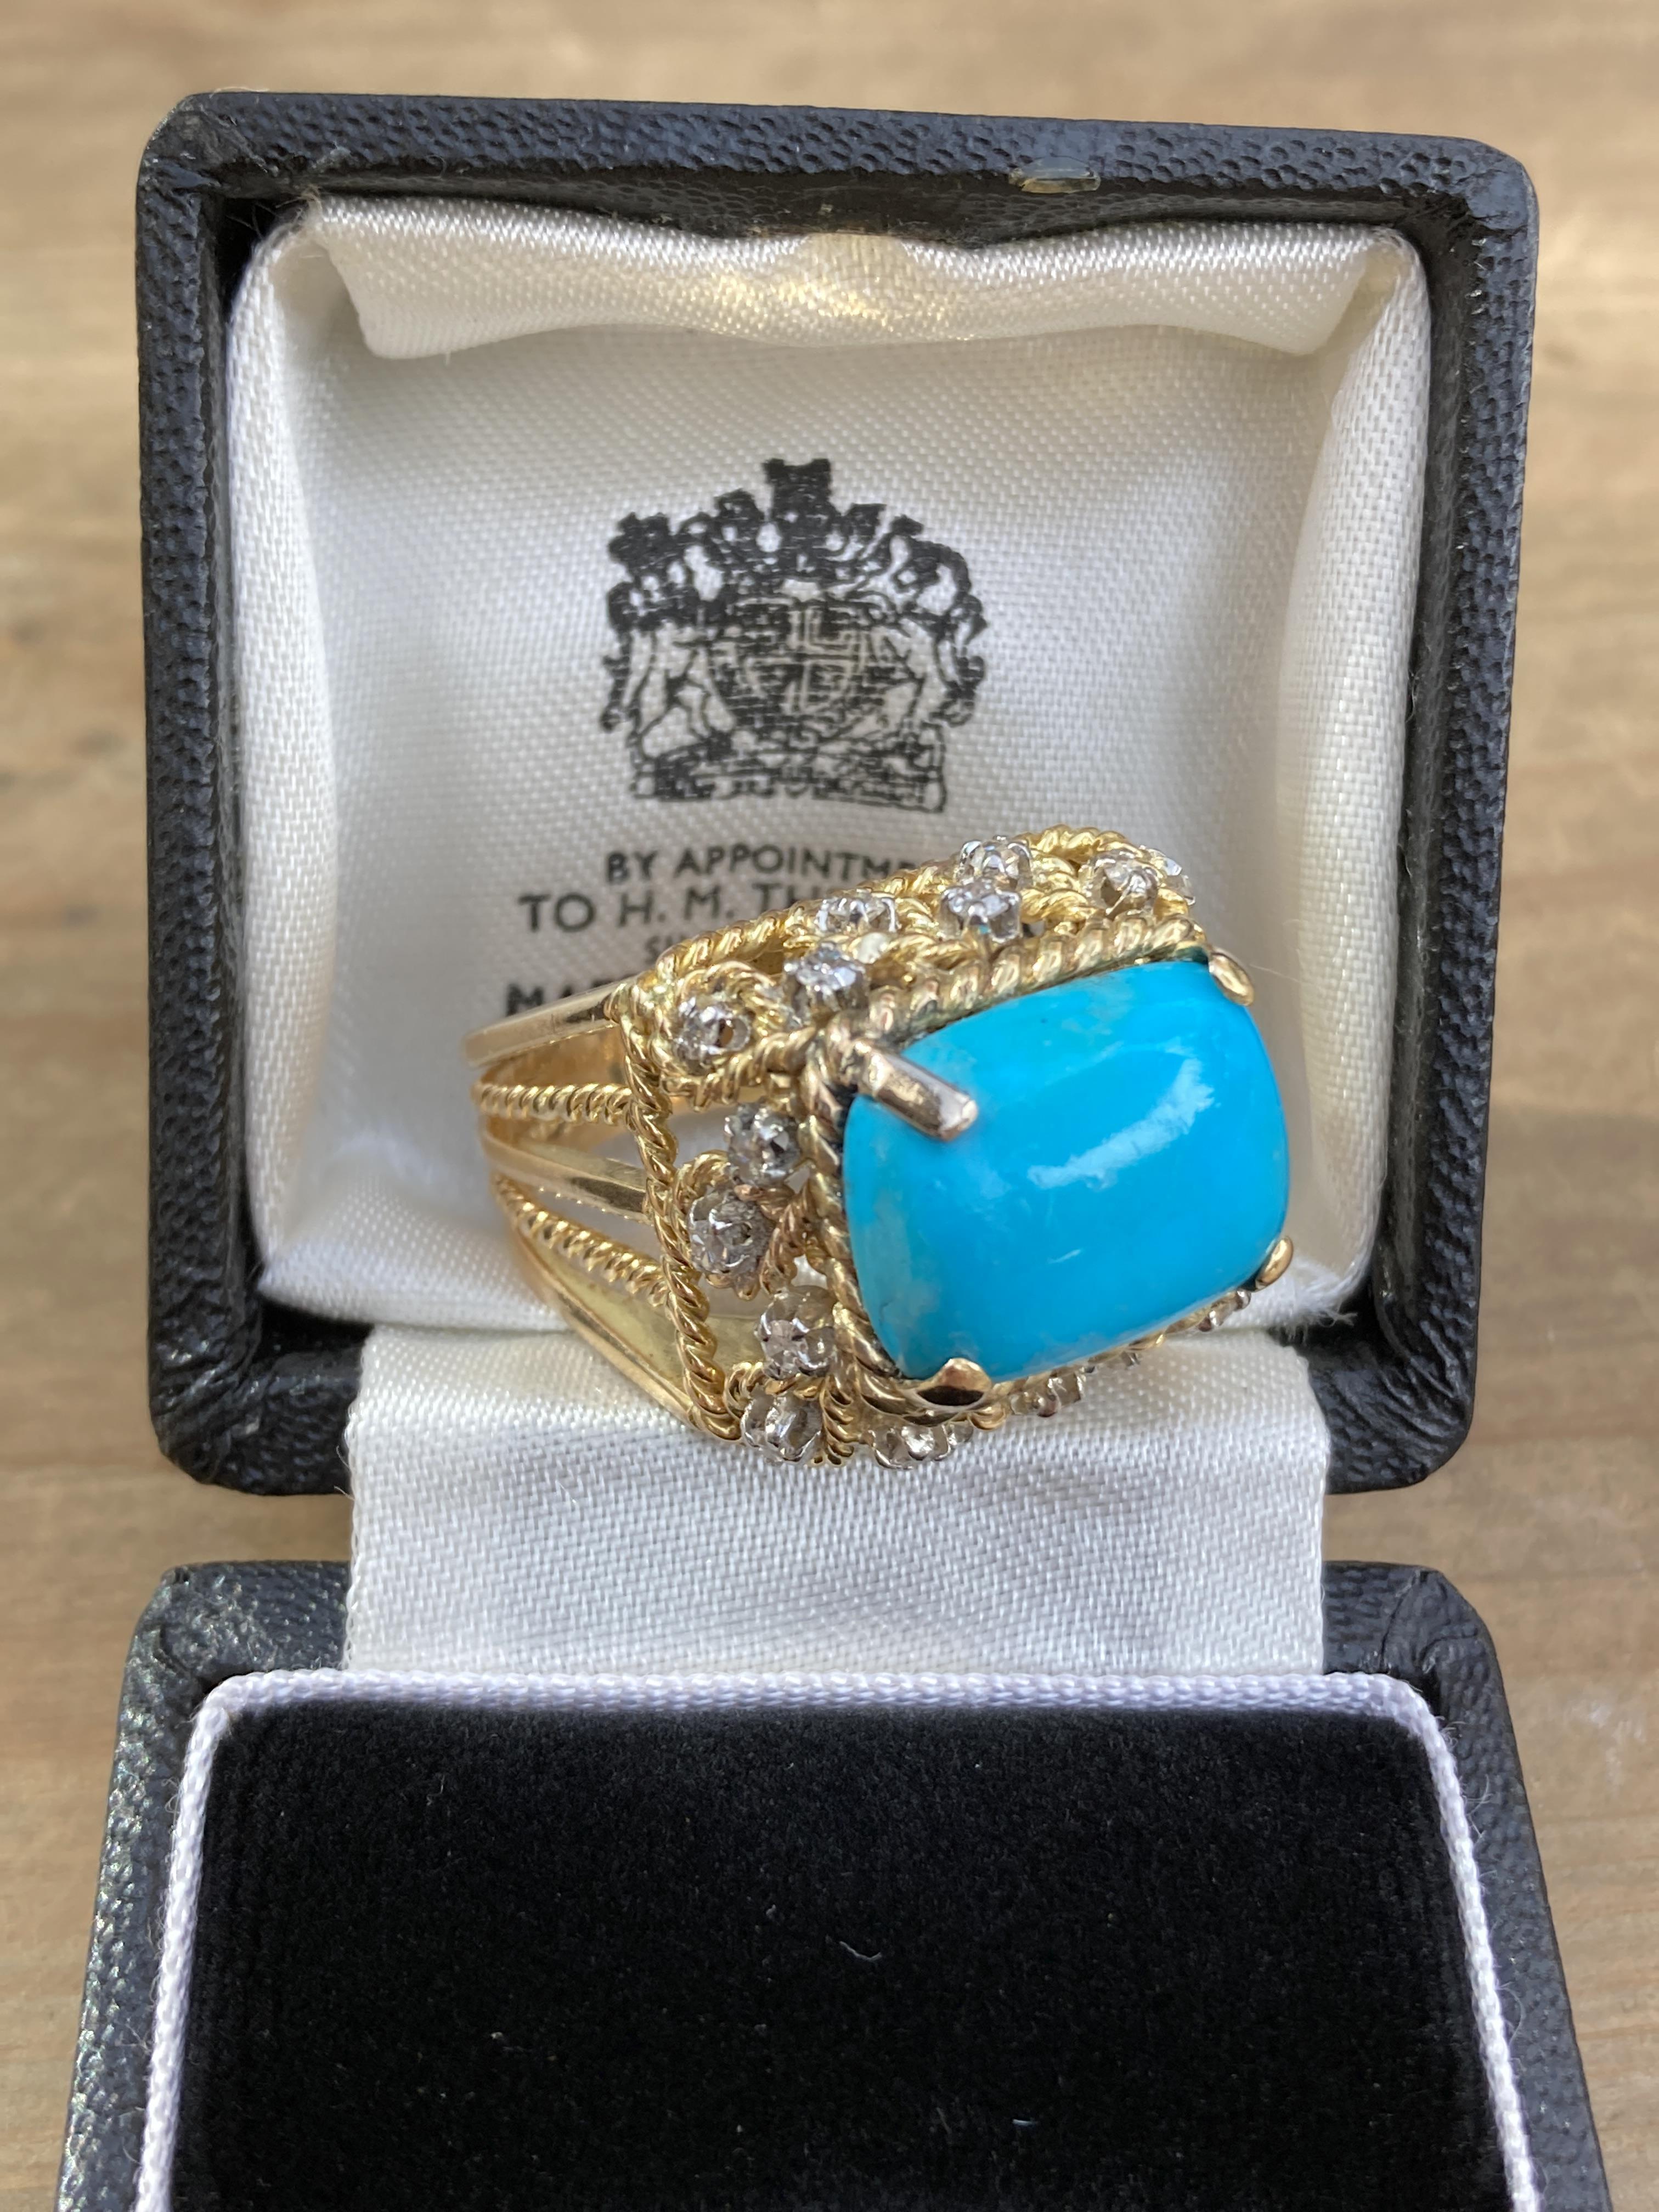 19G 18CT YELLOW GOLD TURQUOISE & DIAMOND COCKTAIL RING - Image 2 of 6